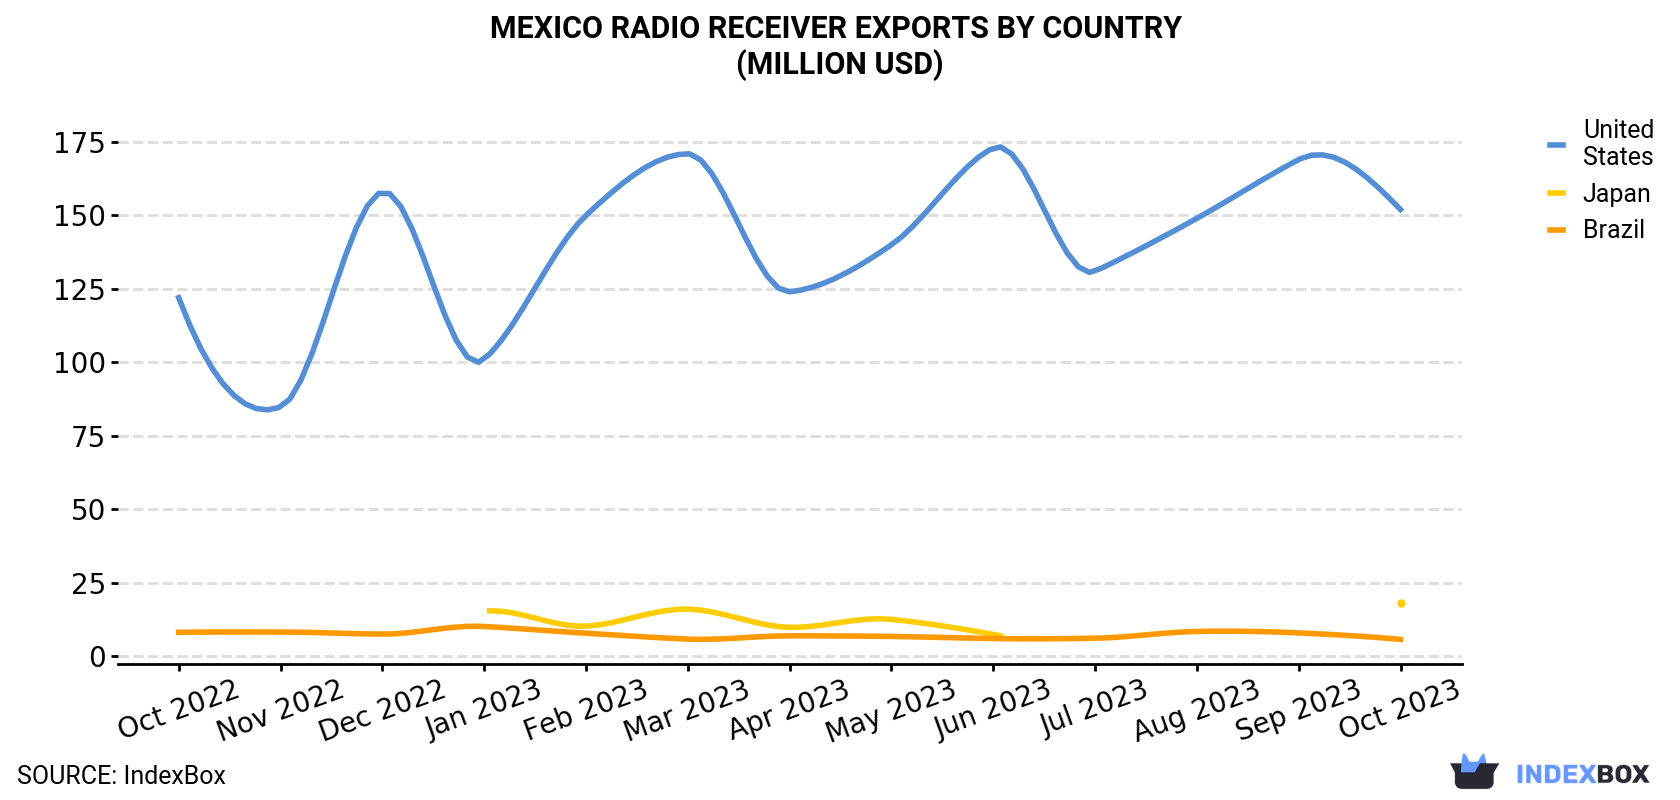 Mexico Radio Receiver Exports By Country (Million USD)